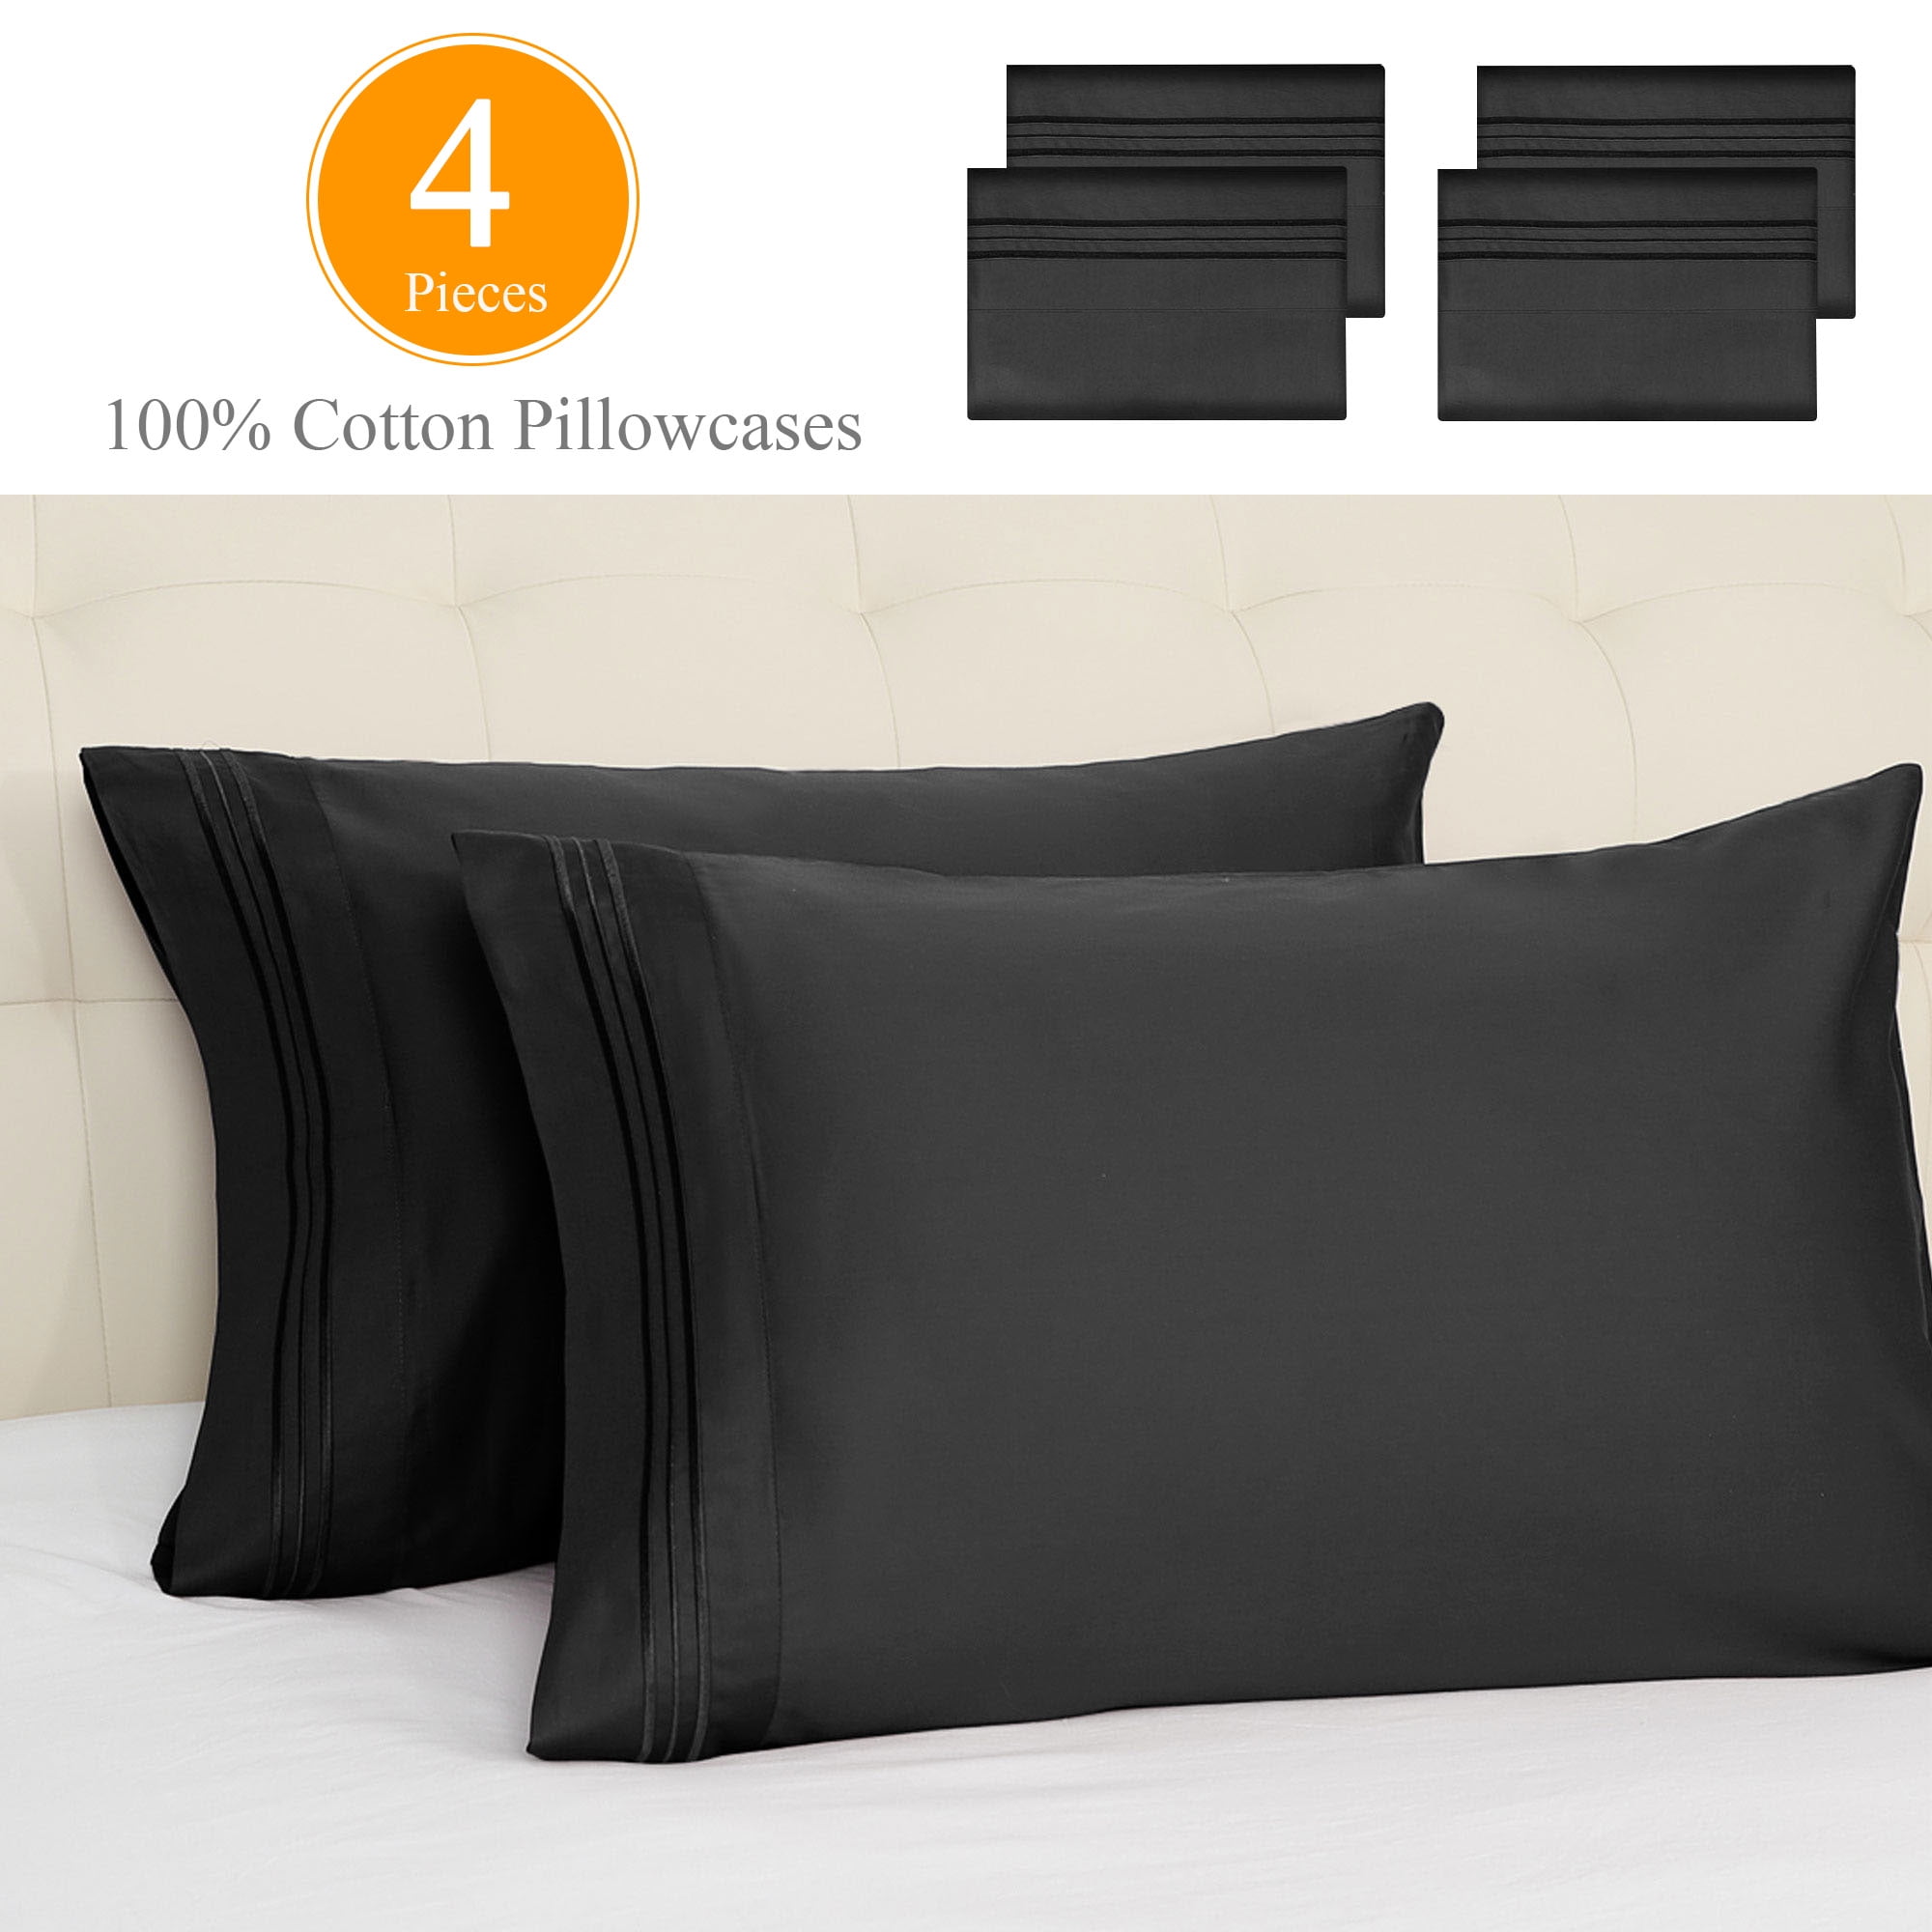 20 new hotel basics brand standard 20''x30'' hotel pillow cases covers t-180 